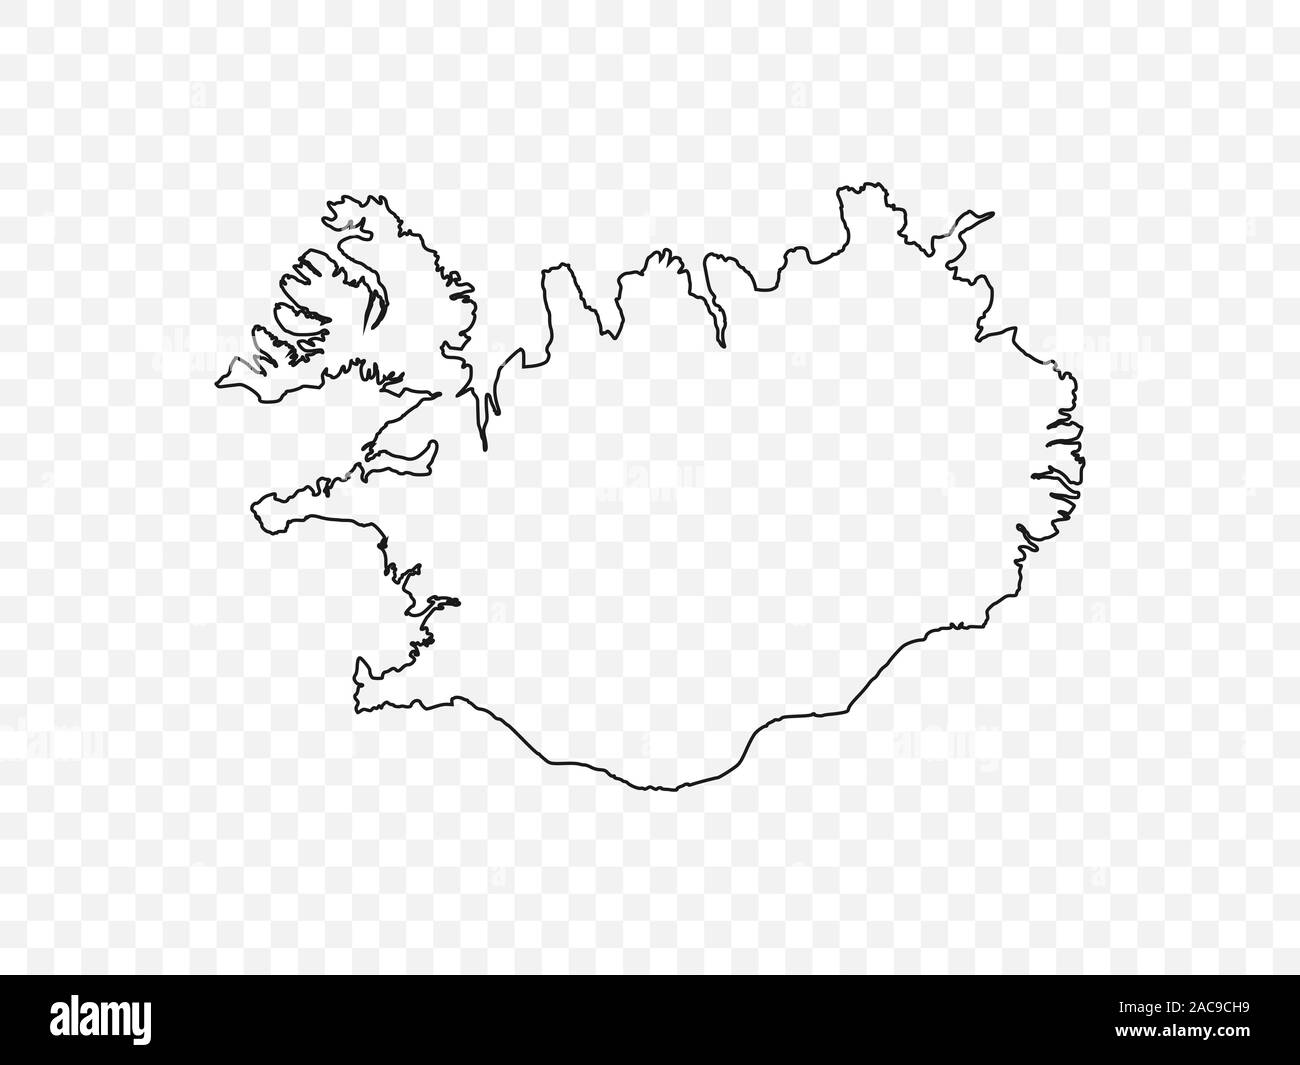 Iceland map on transparent background. Vector illustration. Stock Vector